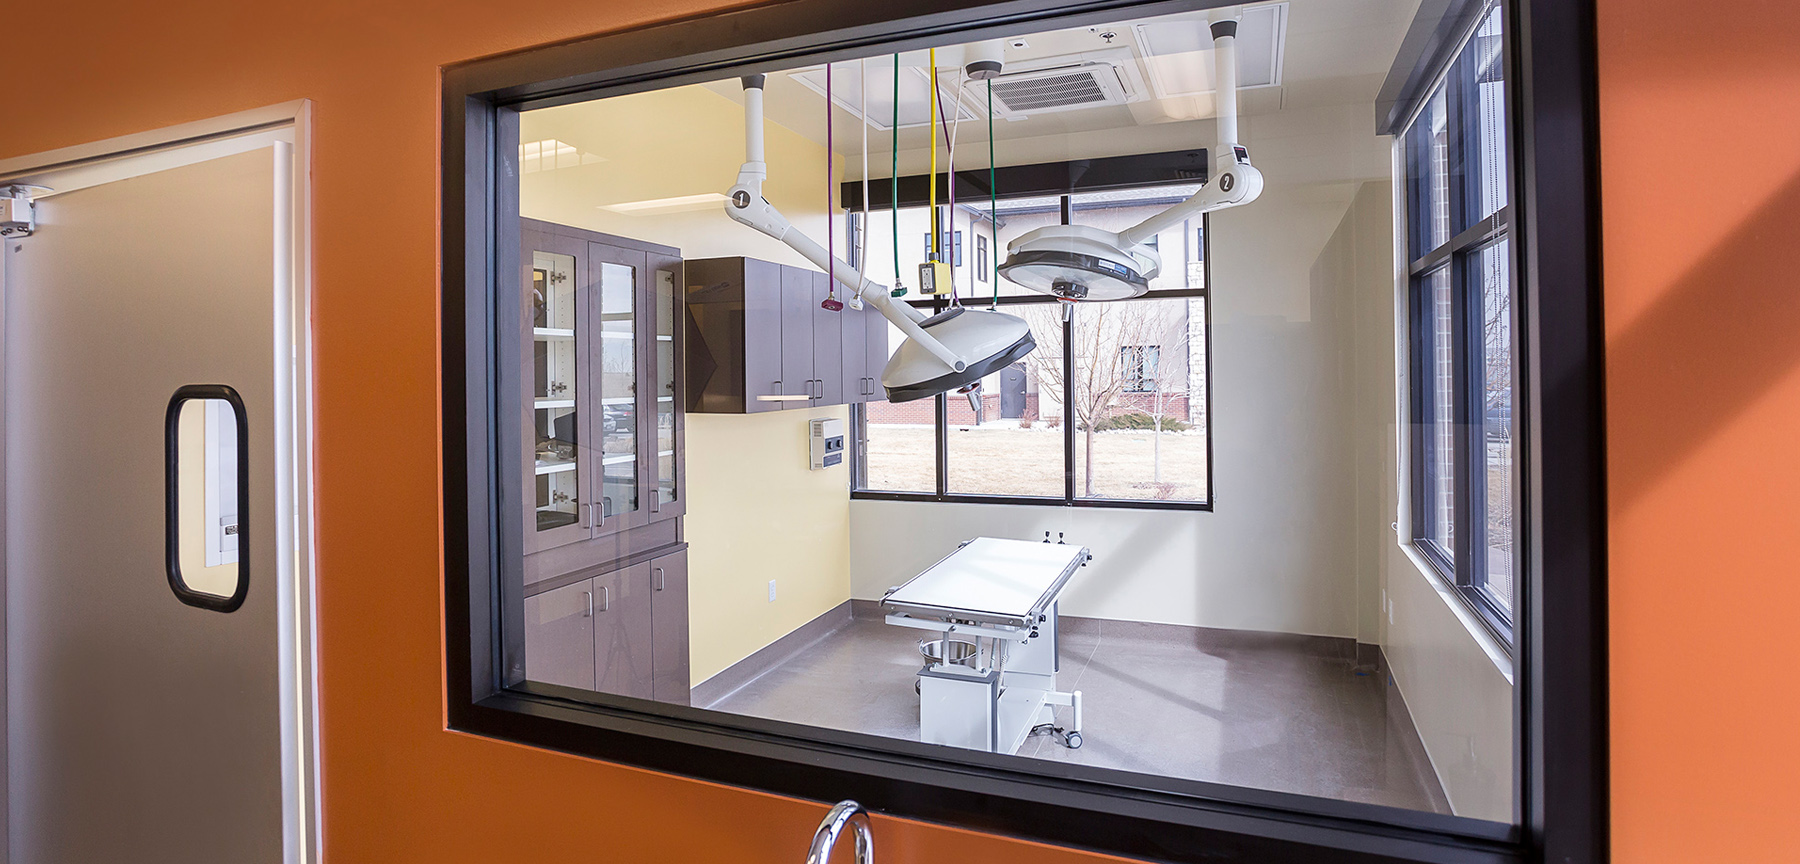 Four Seasons Veterinary Specialists operating room